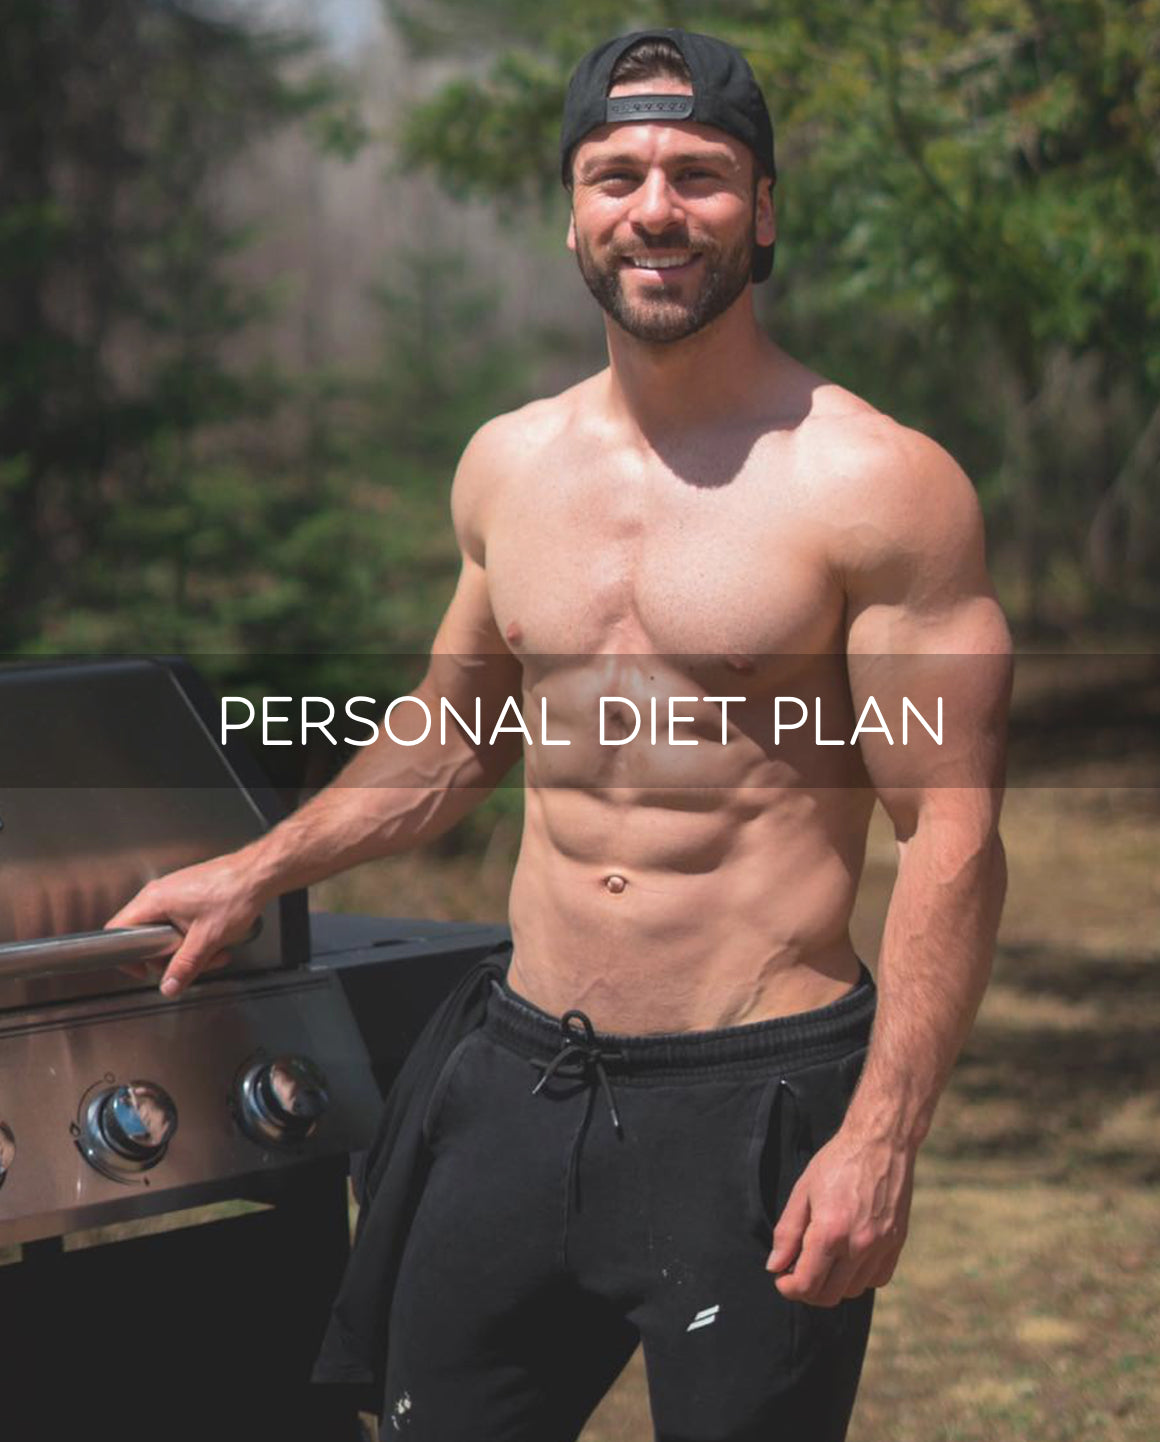 PERSONAL NUTRITION PLAN